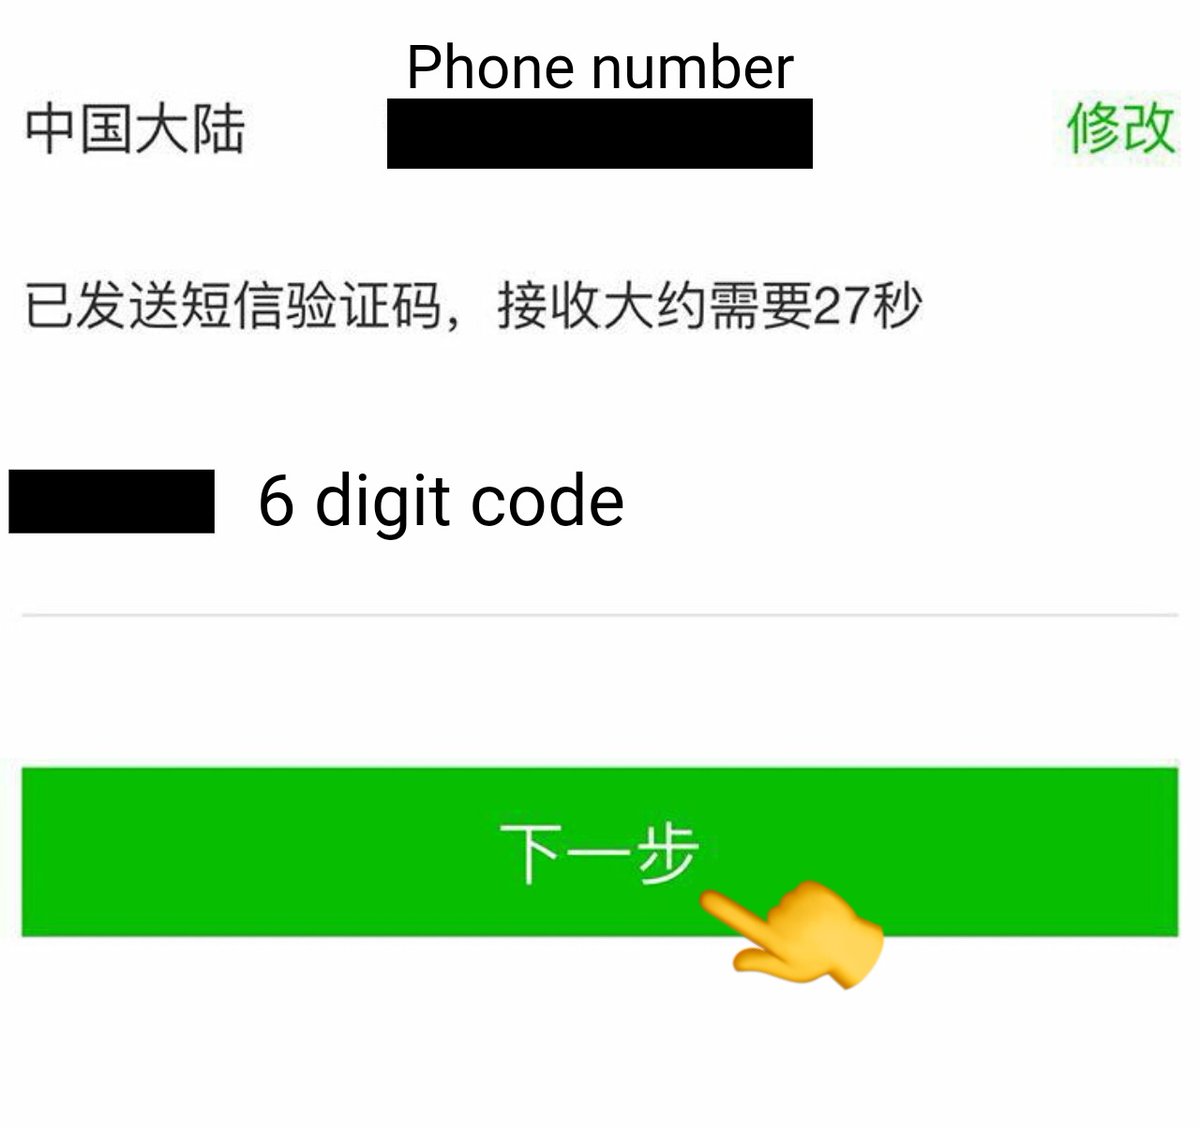 7. Paste the code and press the green button (you're logged in now)